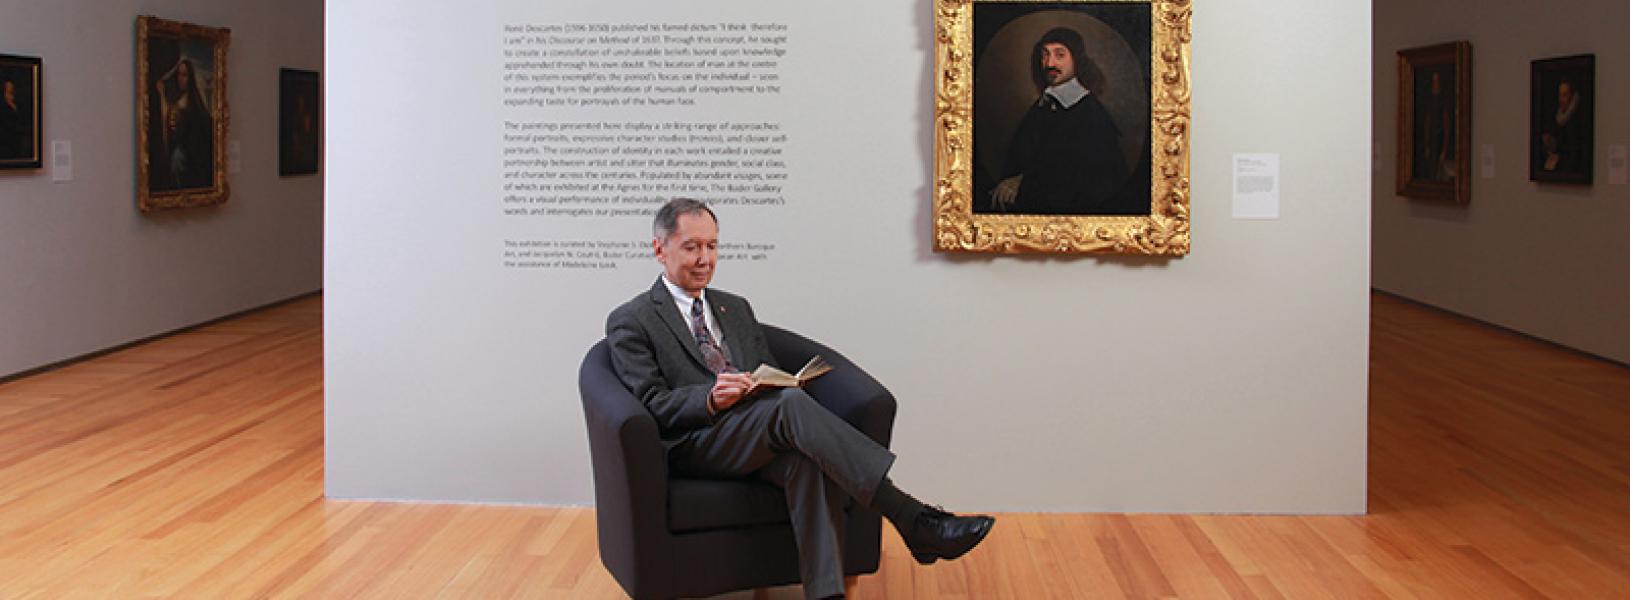 Carlos Prado reads a book while sitting in a chair. Descartes as painted by Nason hangs on a wall behind him.